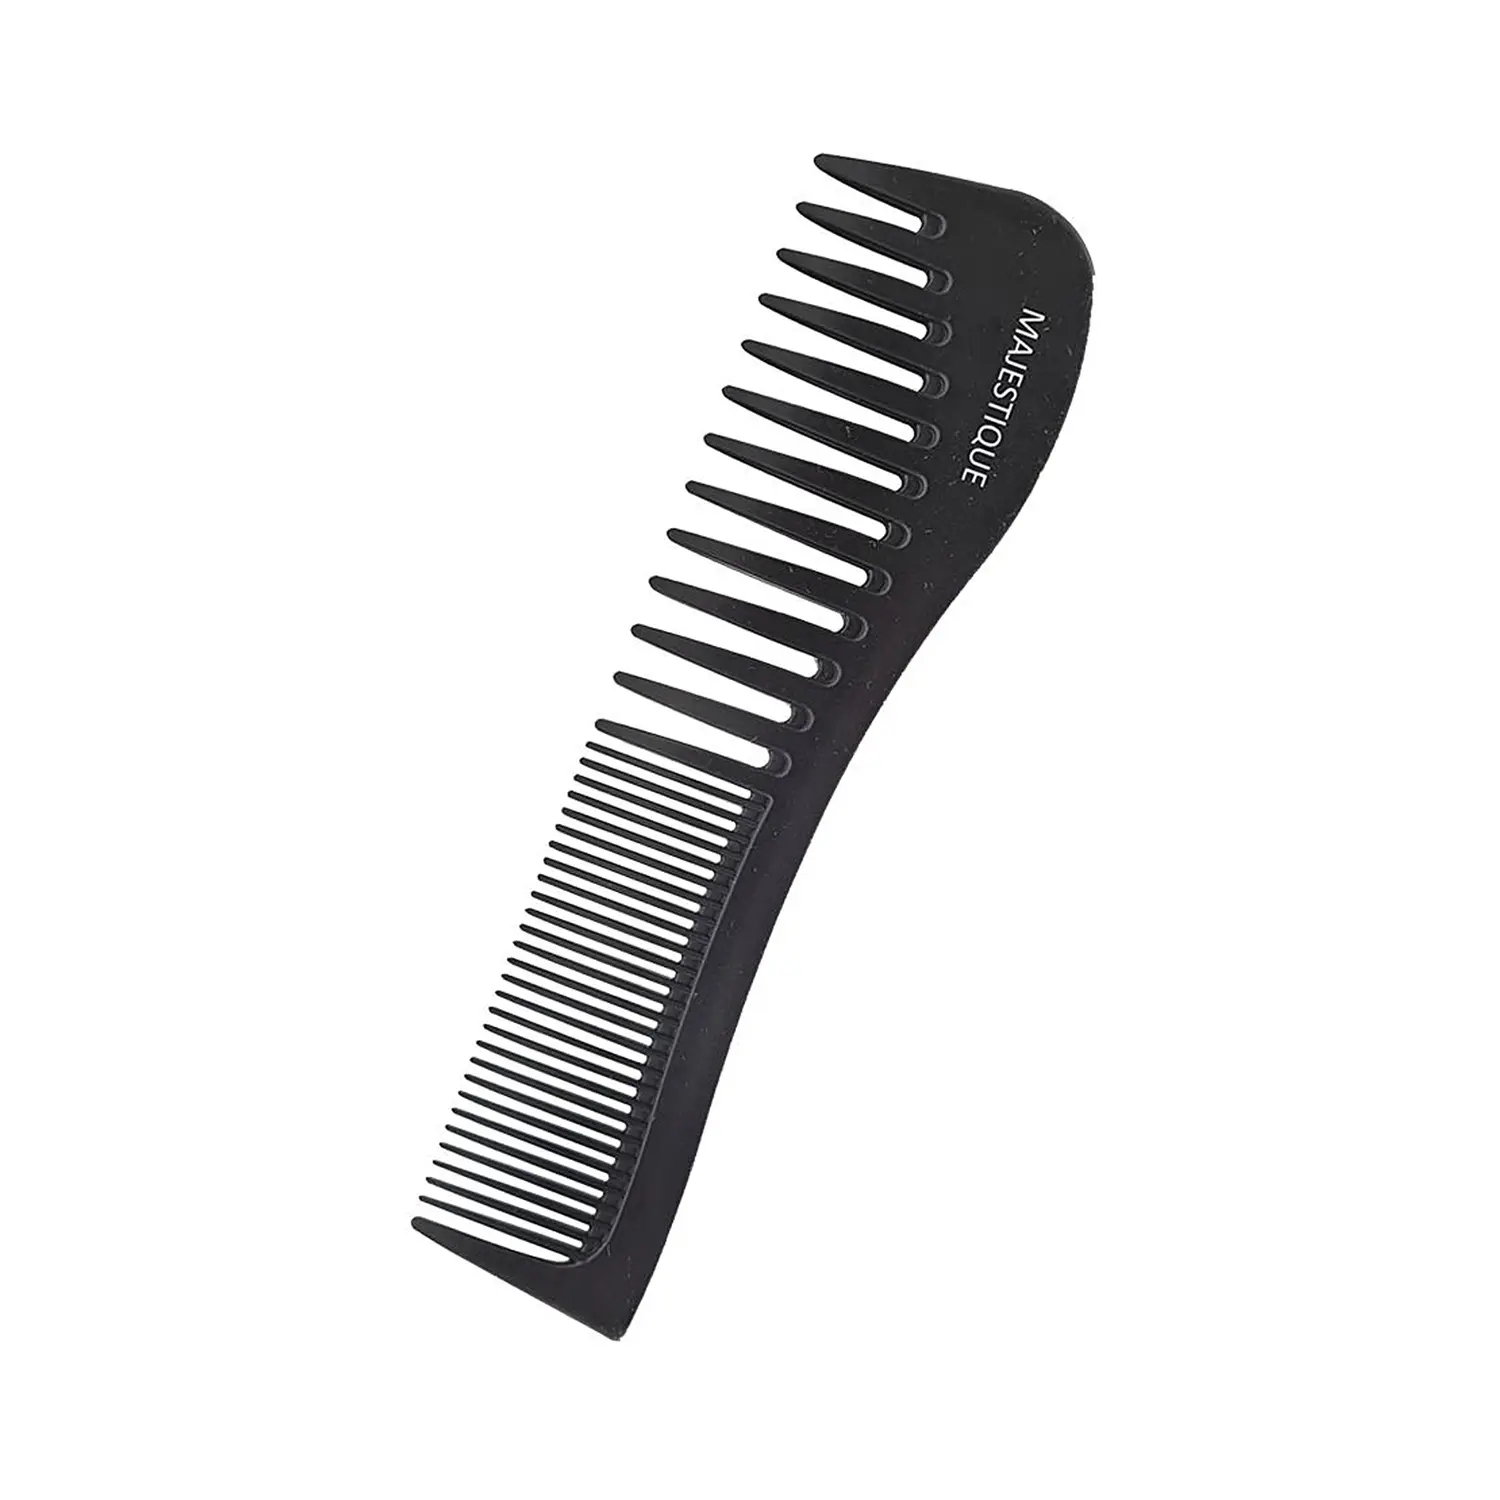 Majestique | Majestique Compact Styling Detangler Comb (Color May Vary)